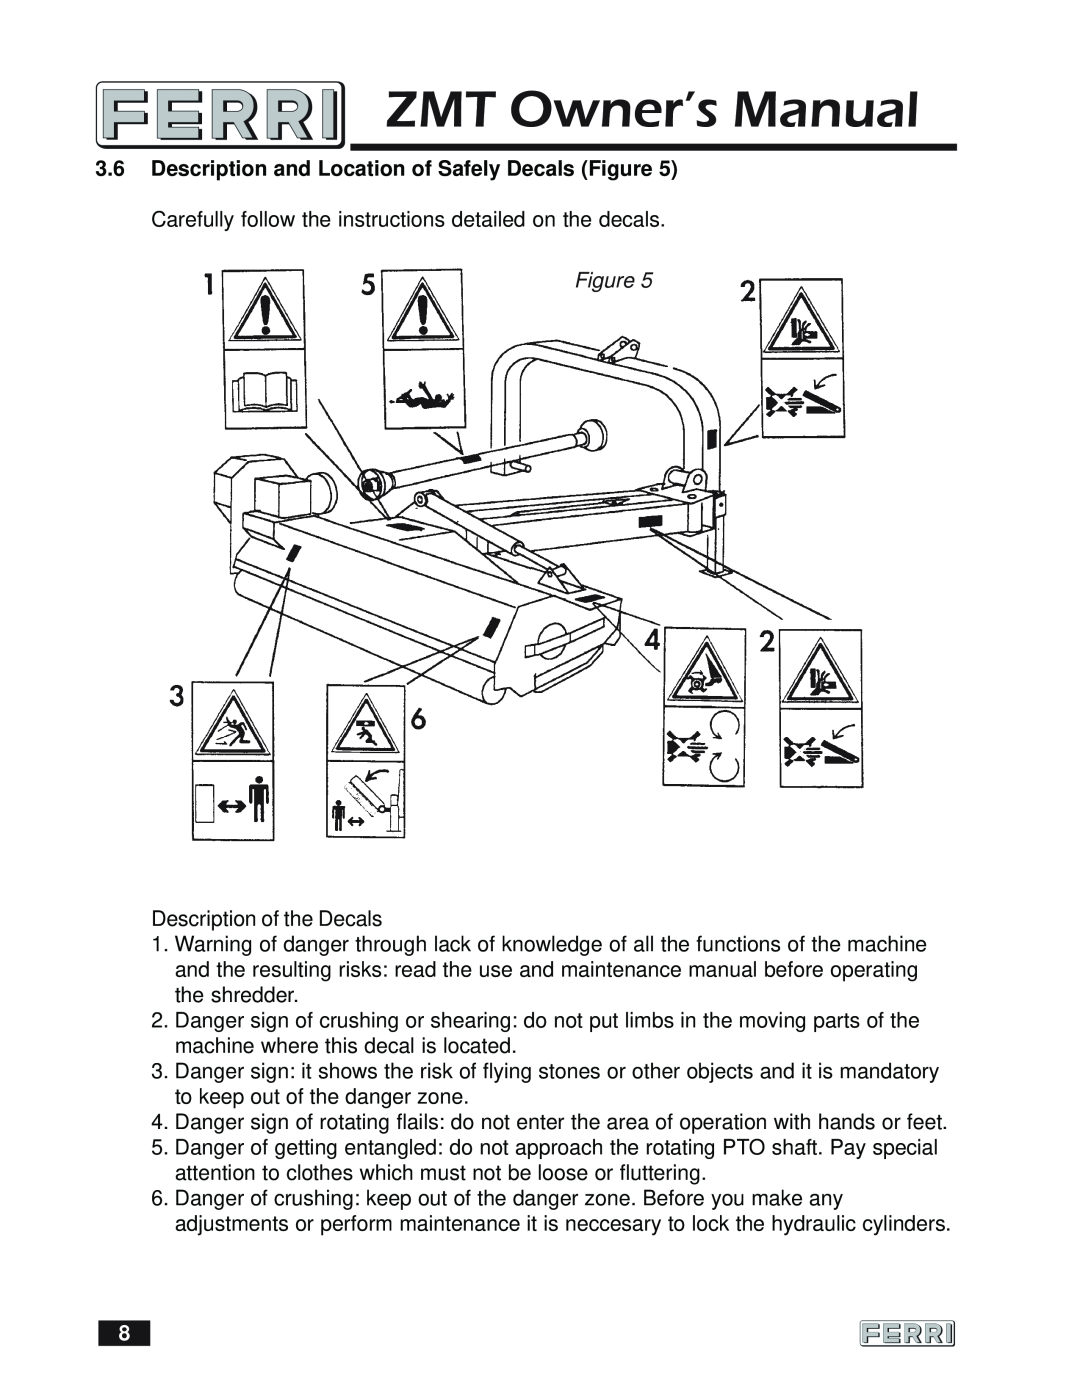 Ferris Industries 160 owner manual Description of the Decals 